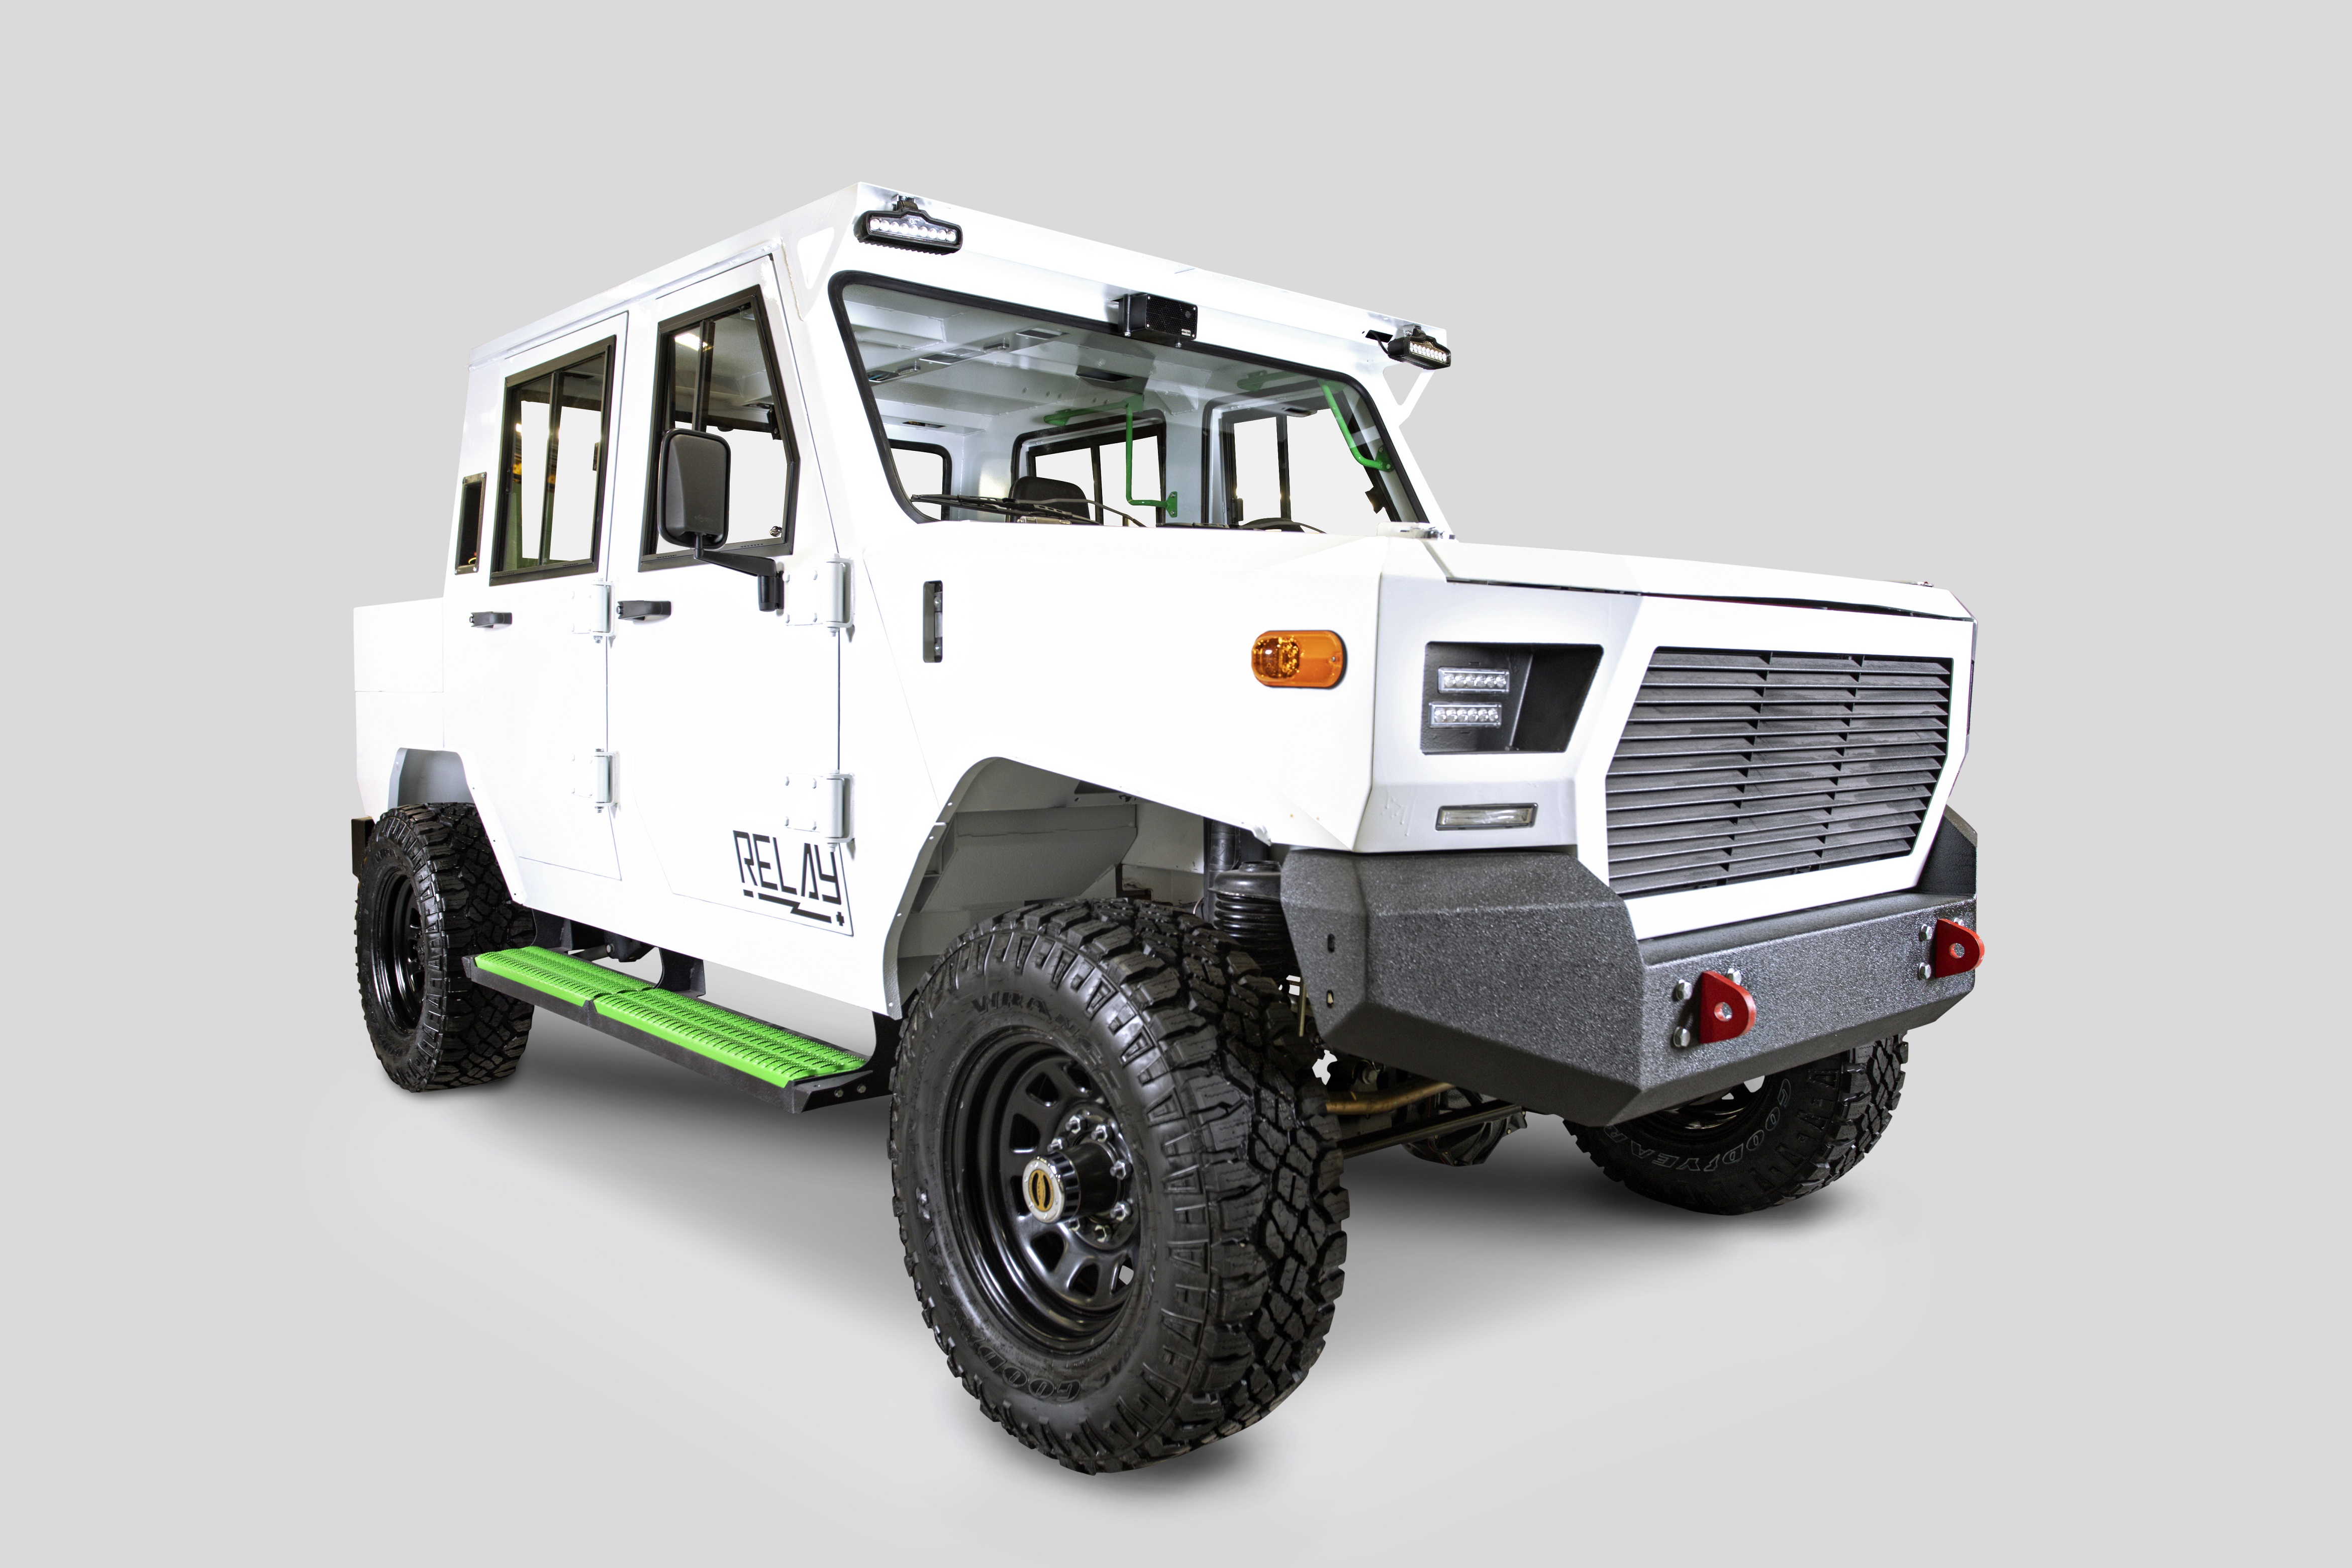 ELECTRIC VEHICLES Miller Technology 'charges' into Bauma with RELAY